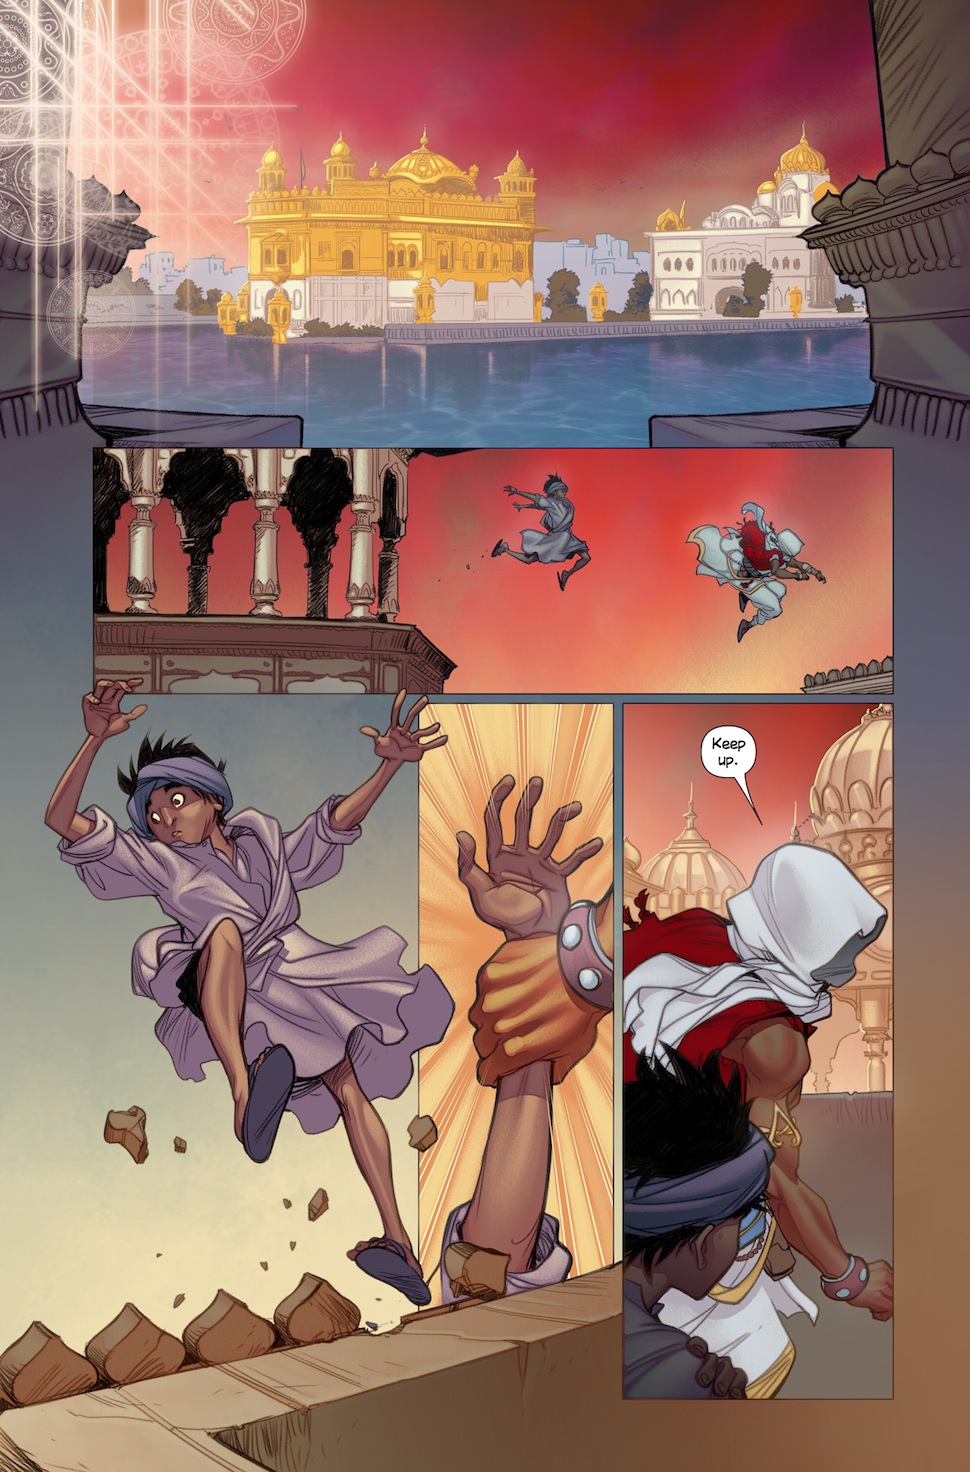 Ubisoft Reveals A New Assassin’s Creed Set In India (It’s A Comic)